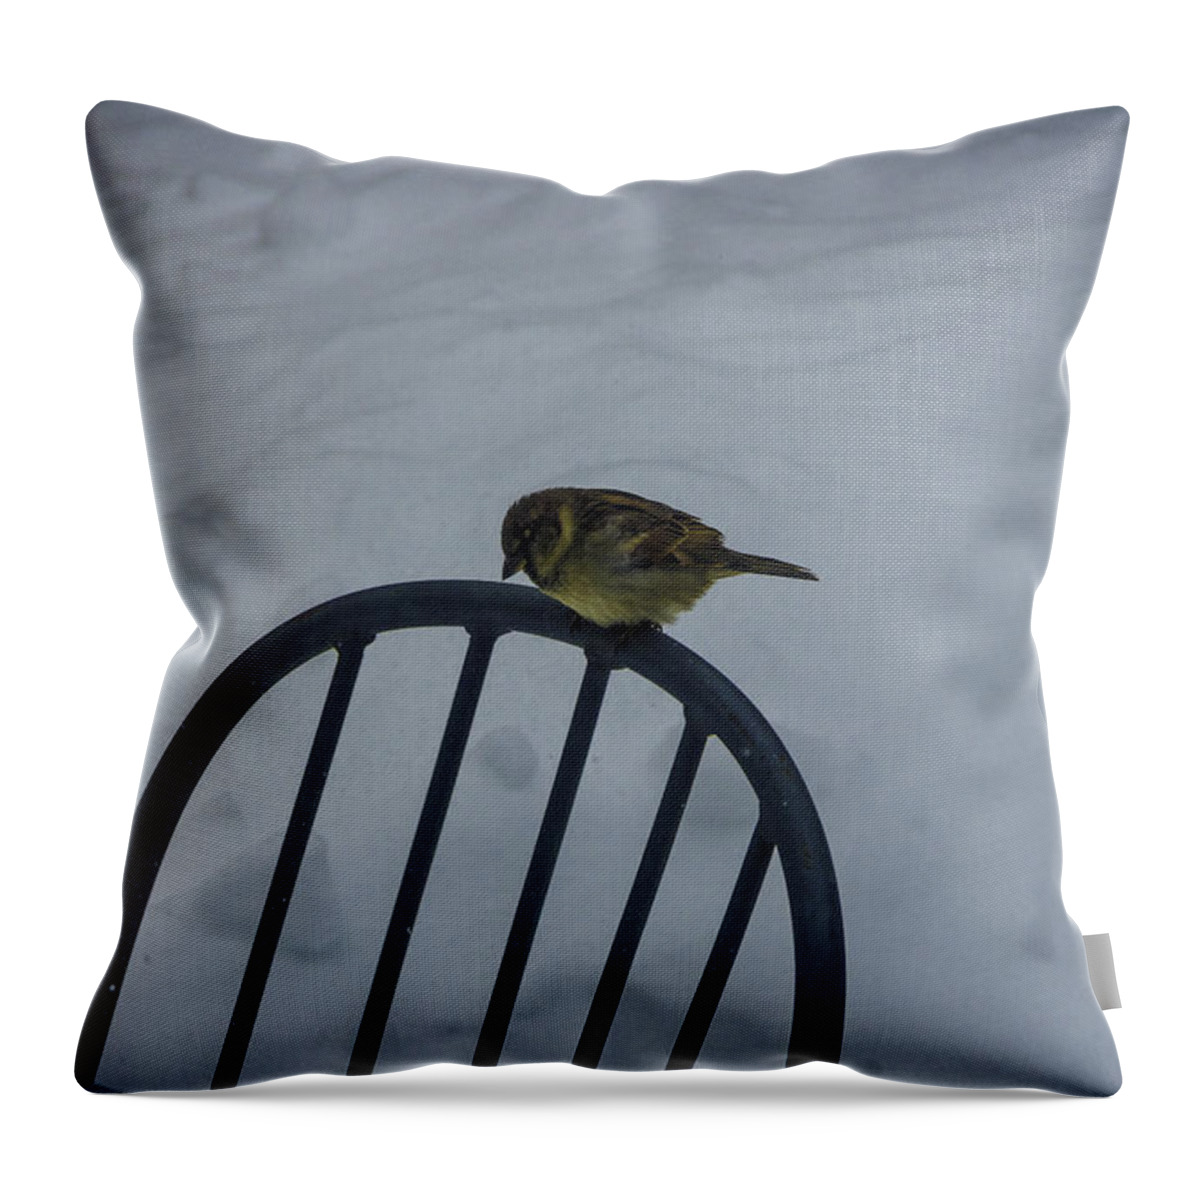 Snow Throw Pillow featuring the photograph New Perch by Nathan Seavey